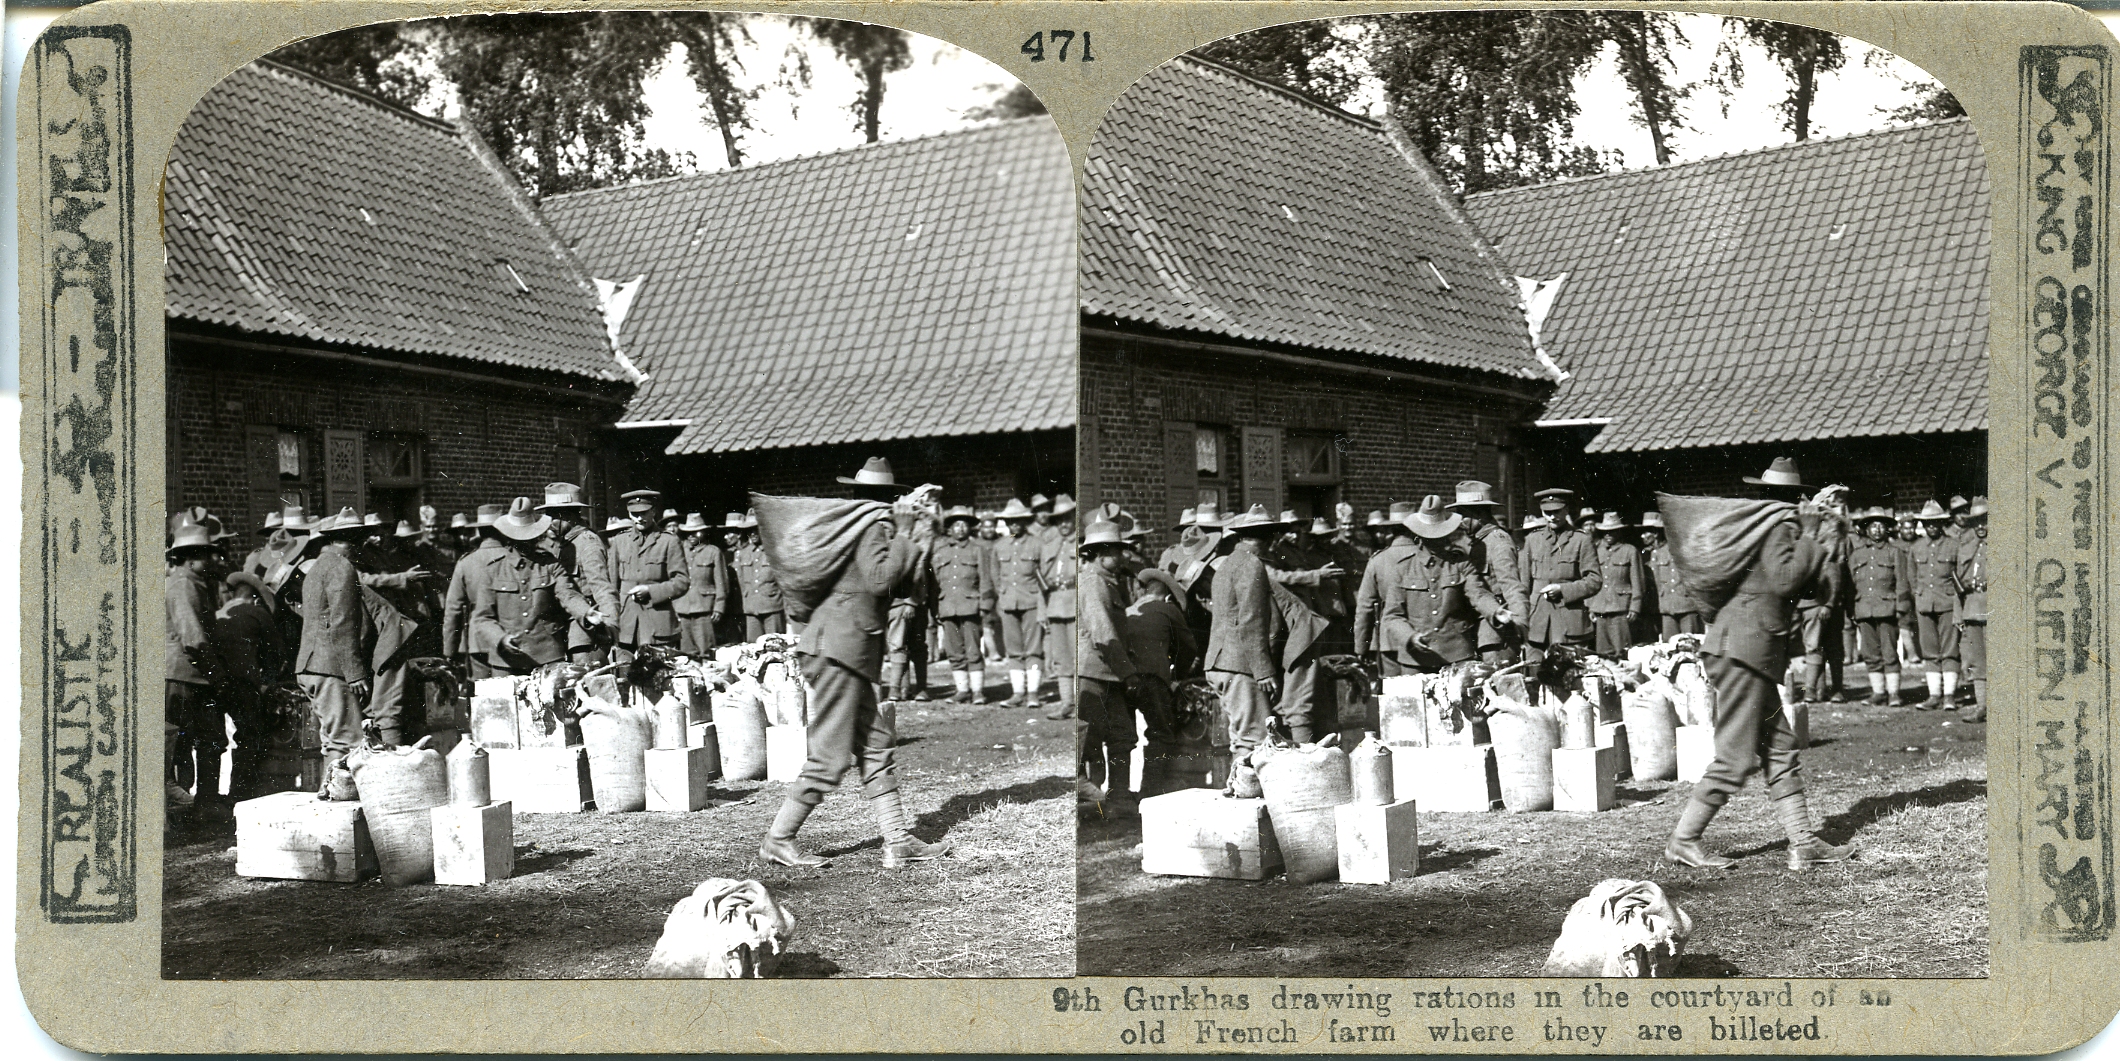 9th Gurkhas drawing rations in the courtyard of an old French farm where they are billeted